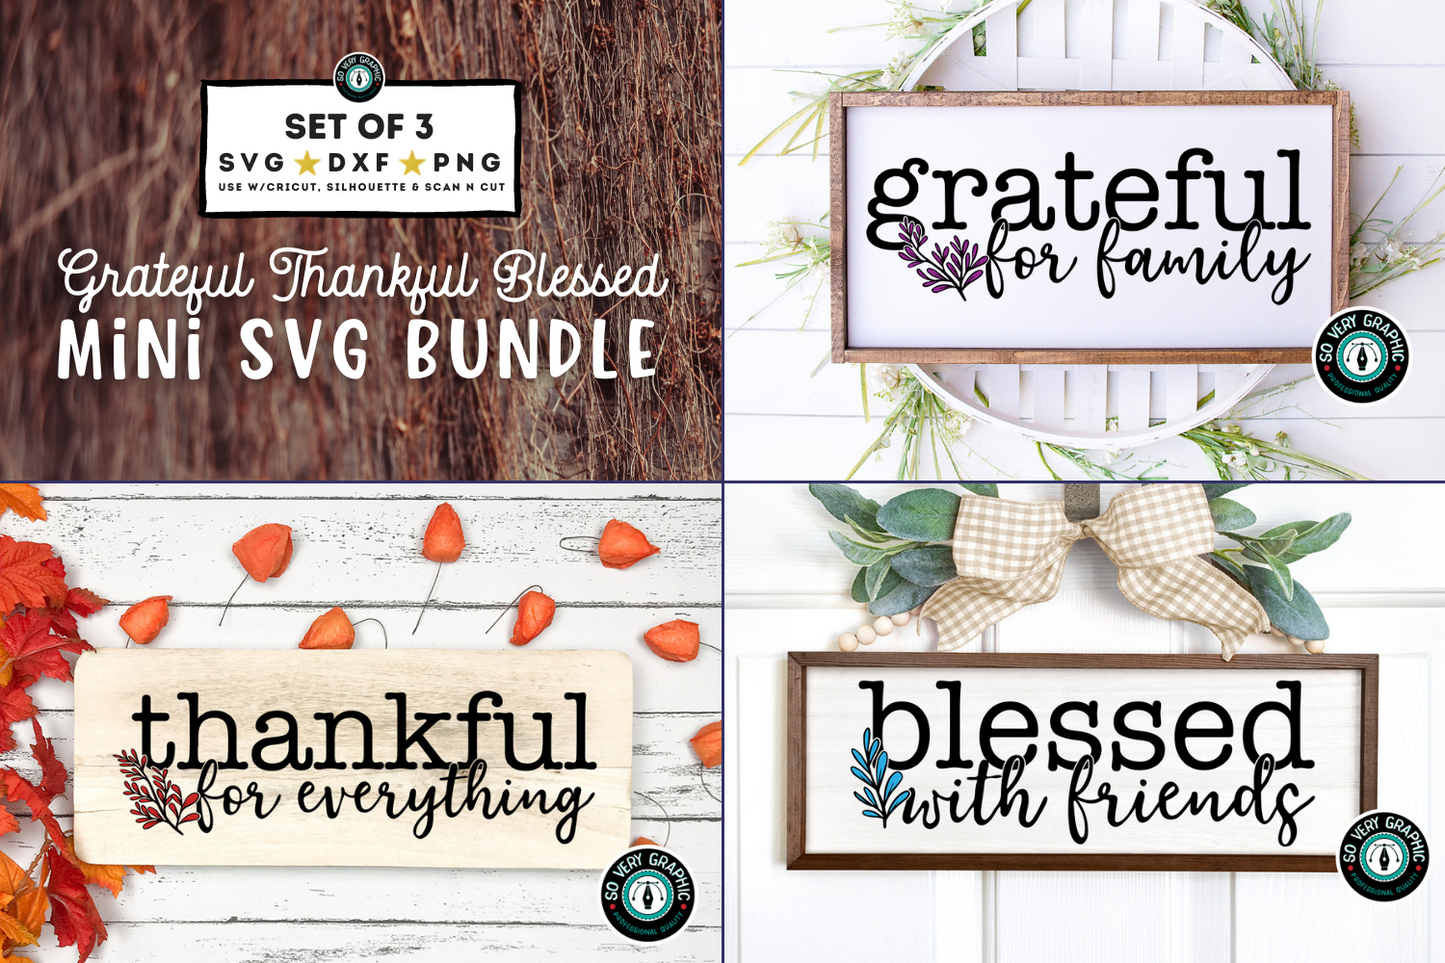 Grateful Thankful Blessed Mini SVG Design Bundle from So Very Graphic